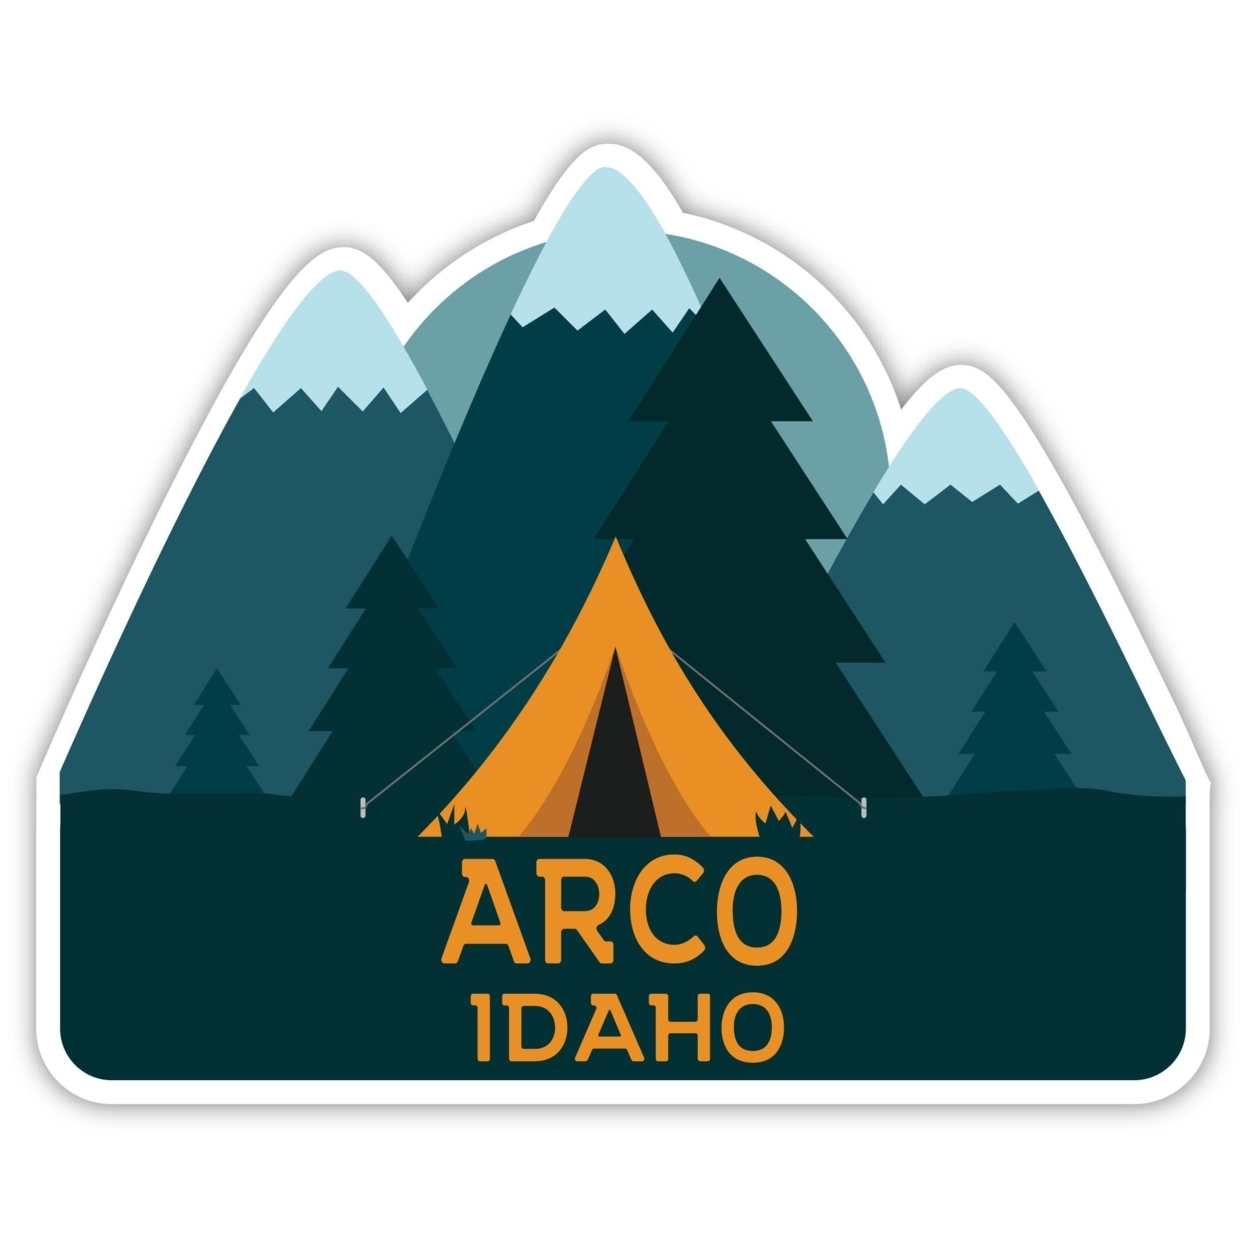 Arco Idaho Souvenir Decorative Stickers (Choose Theme And Size) - 4-Pack, 10-Inch, Tent